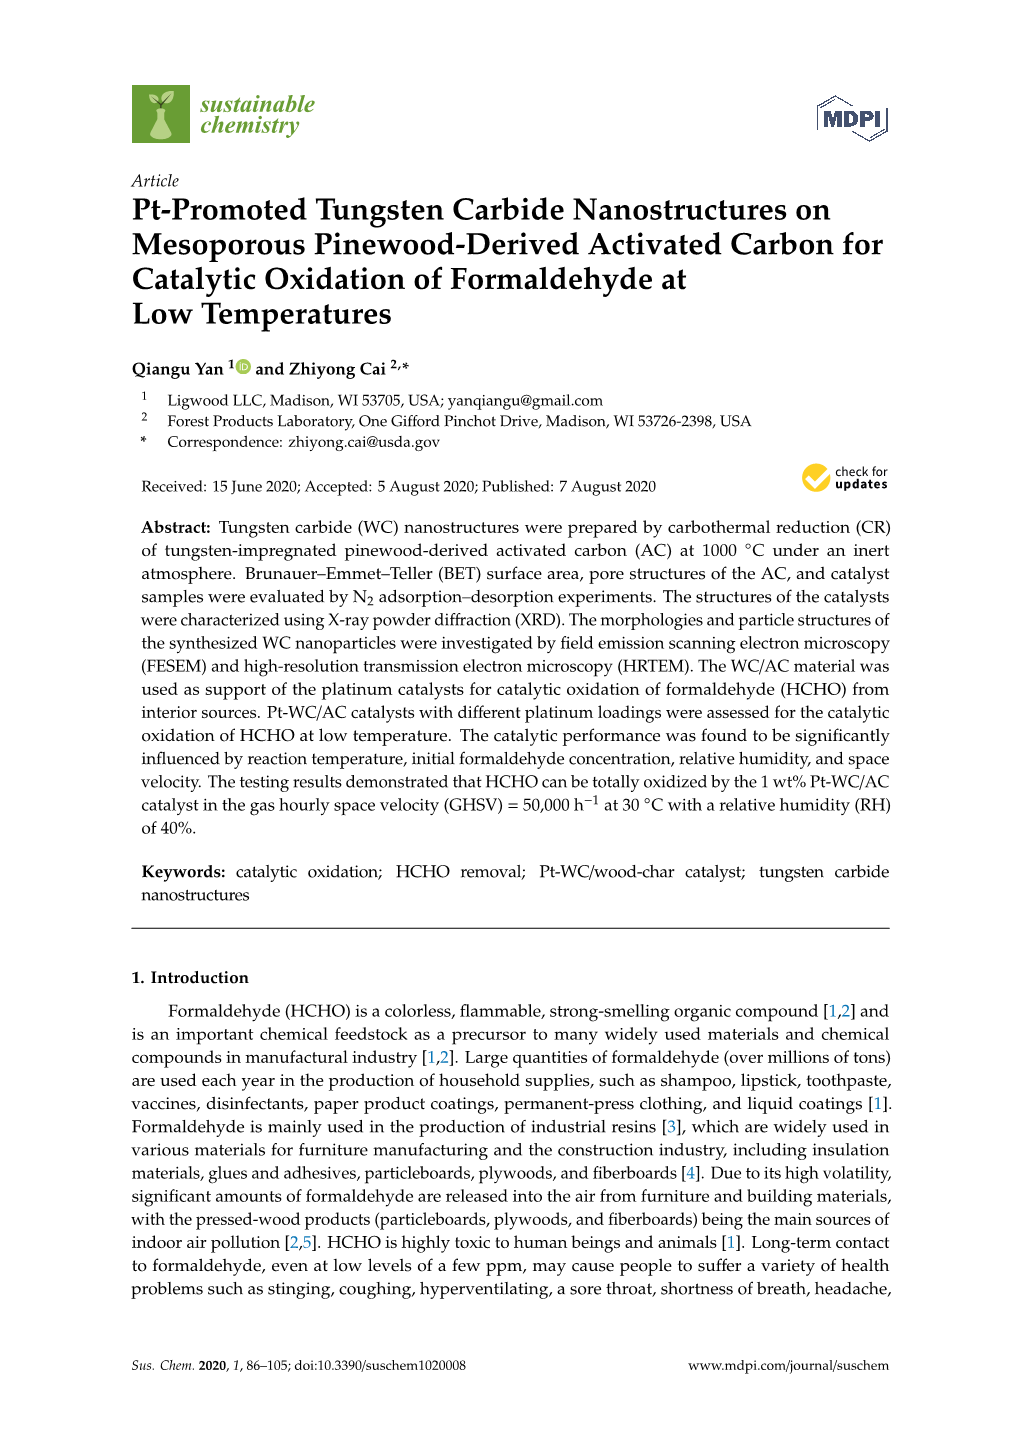 Pt-Promoted Tungsten Carbide Nanostructures on Mesoporous Pinewood-Derived Activated Carbon for Catalytic Oxidation of Formaldehyde at Low Temperatures